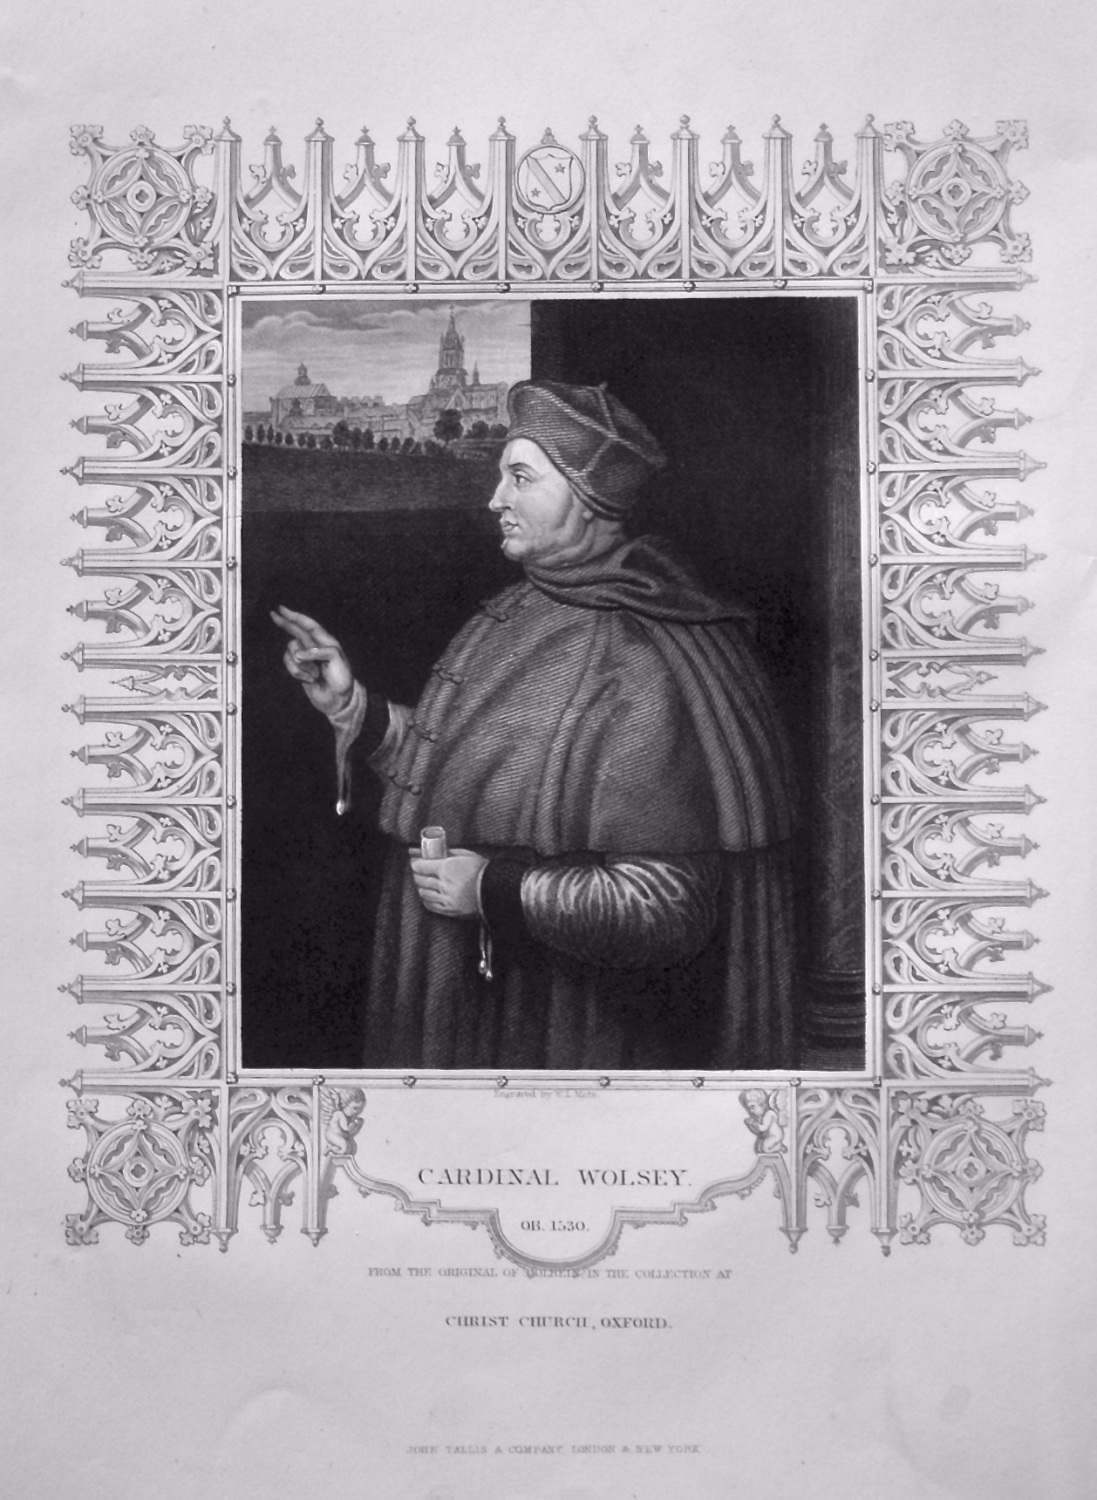 Cardinal Wolsey.  OB. 1530.  From the original of Holbein in the collection